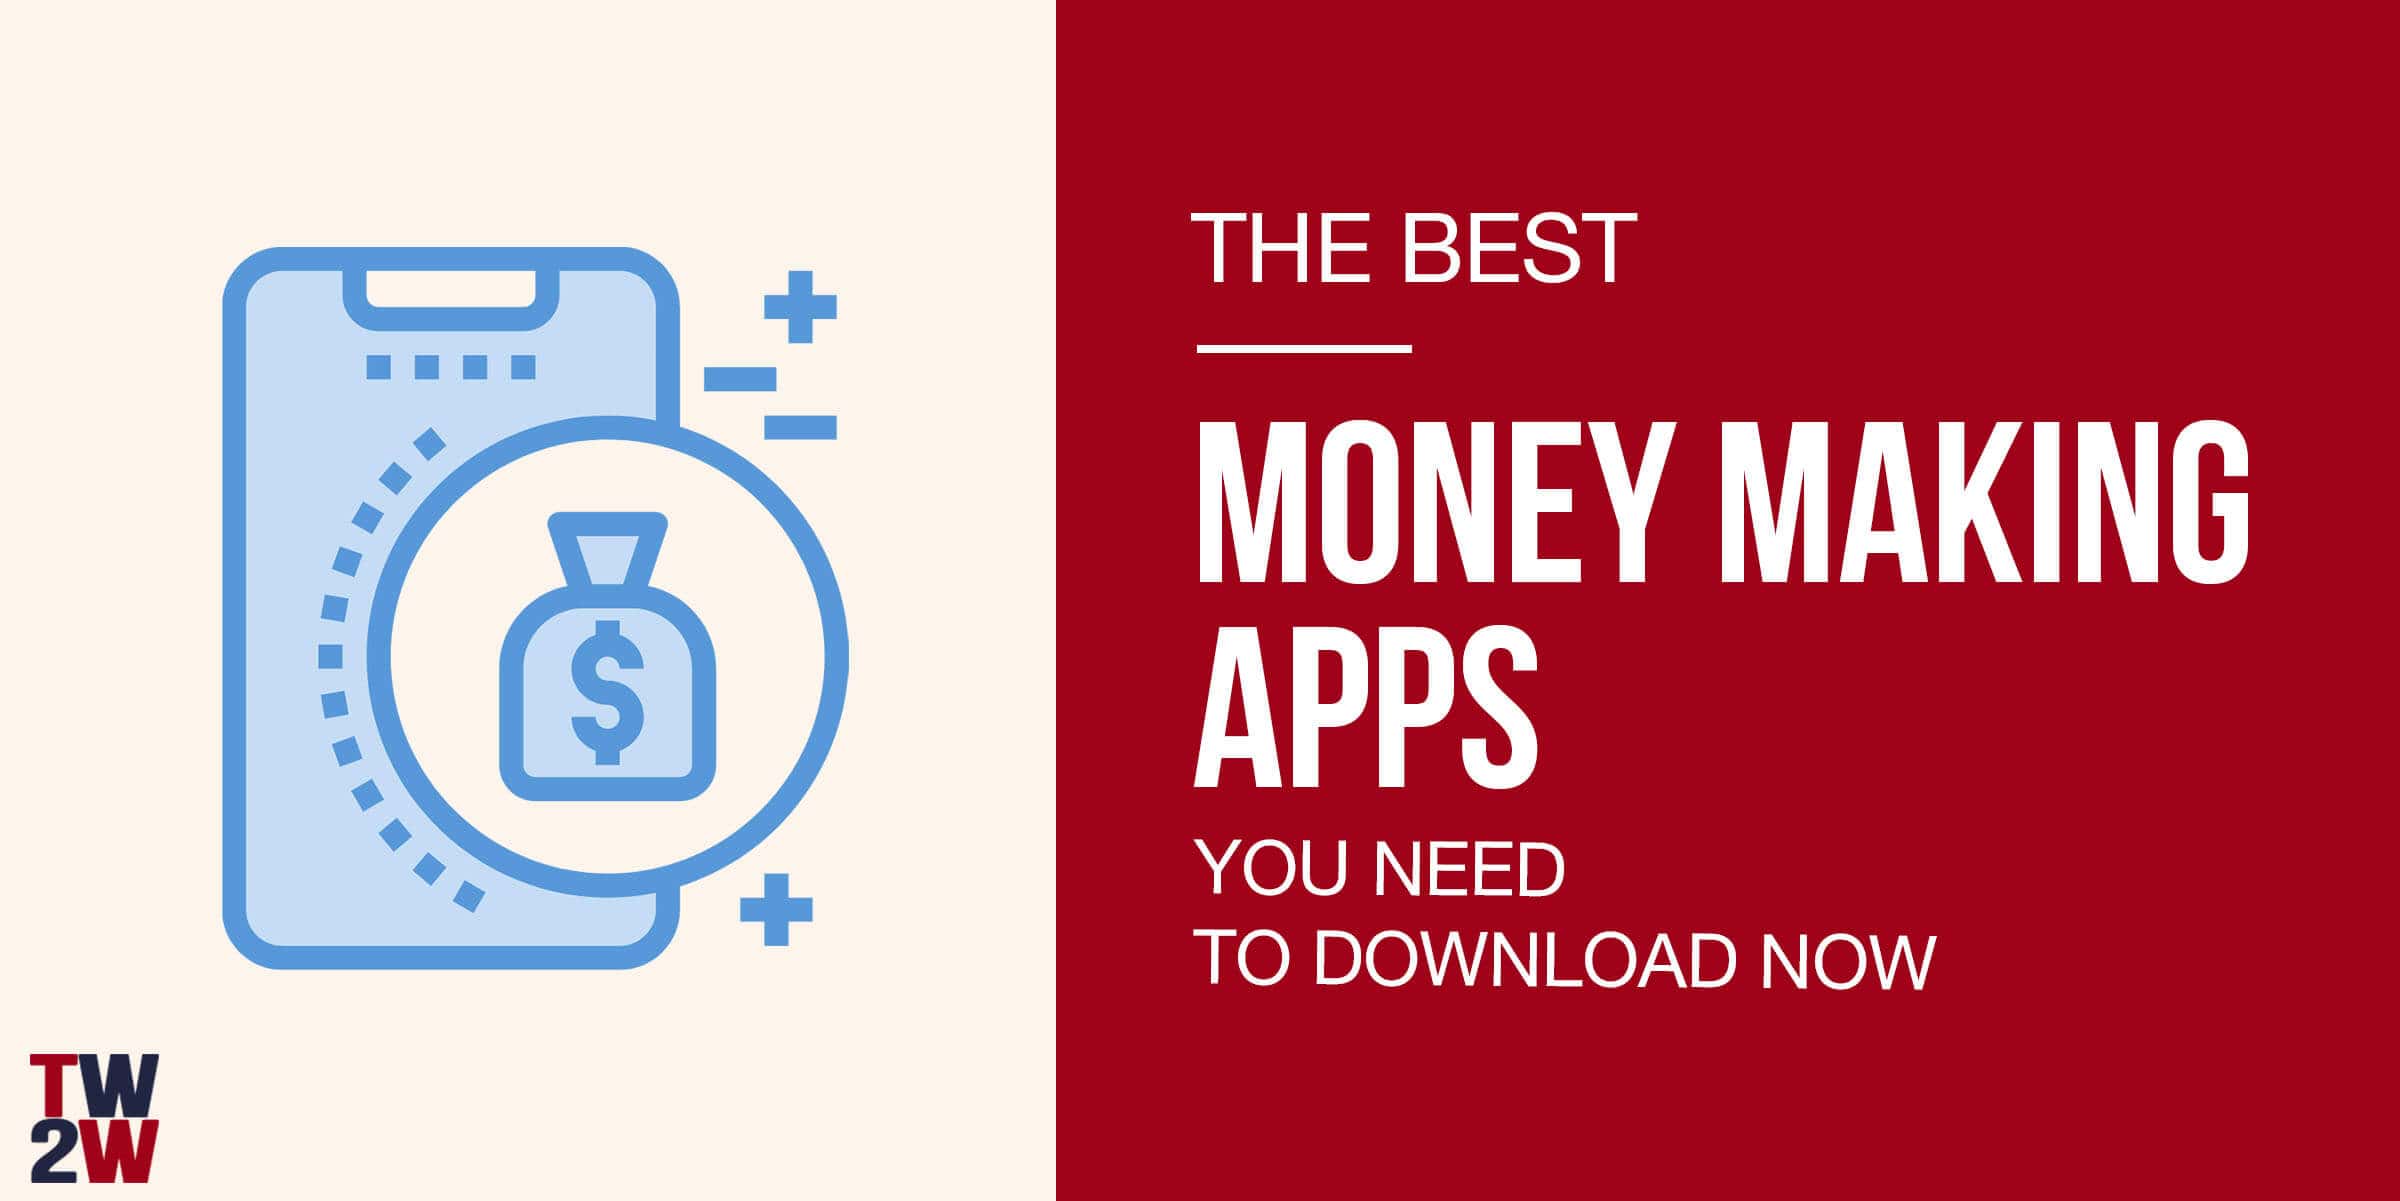 What is the fastest money making app